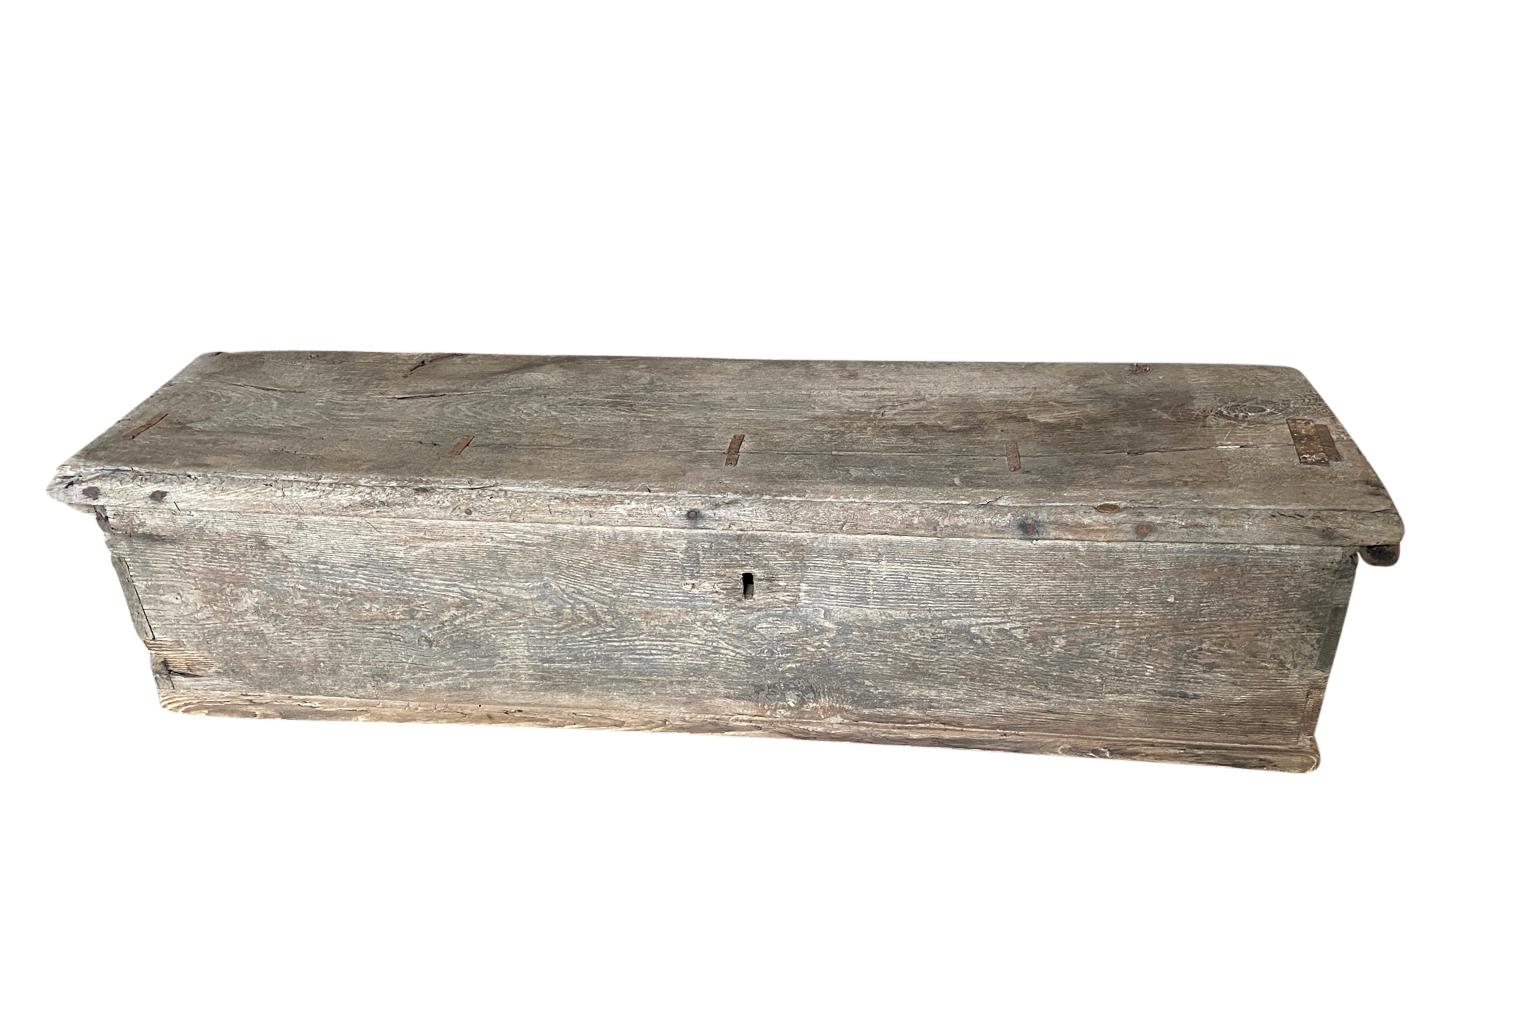 A very charming 18th Century Coffre - Trunk from the Catalan region of Spain. Soundly constructed from naturally washed pine with dovetail construction and iron strapping. Wonderful patina. Perfect at the foot of a bed or under a picture window.